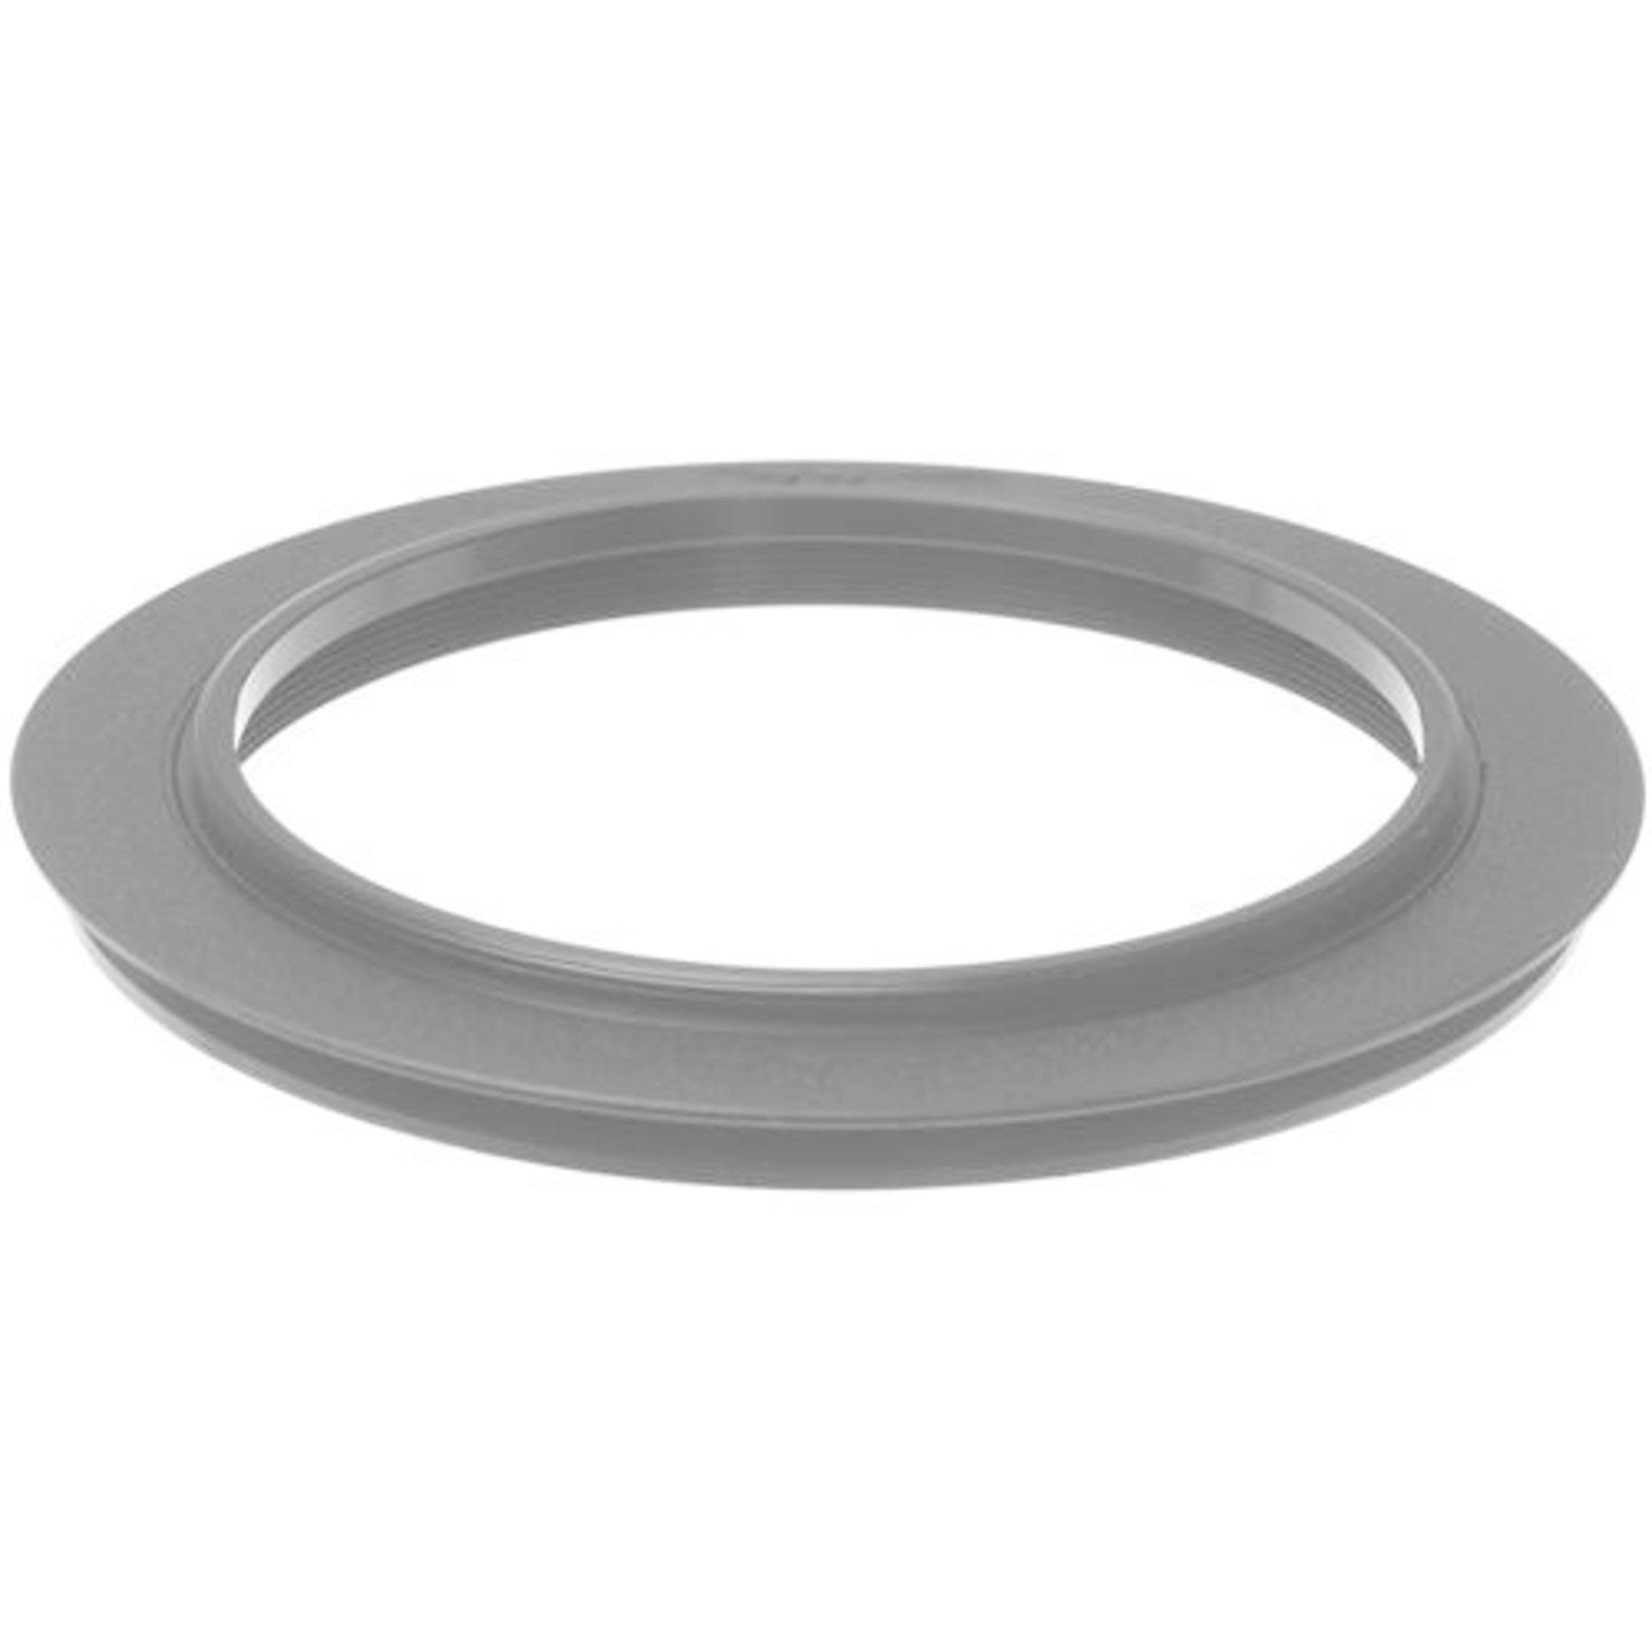 Lee LEE Filters 77mm Adapter Ring for Foundation Kit